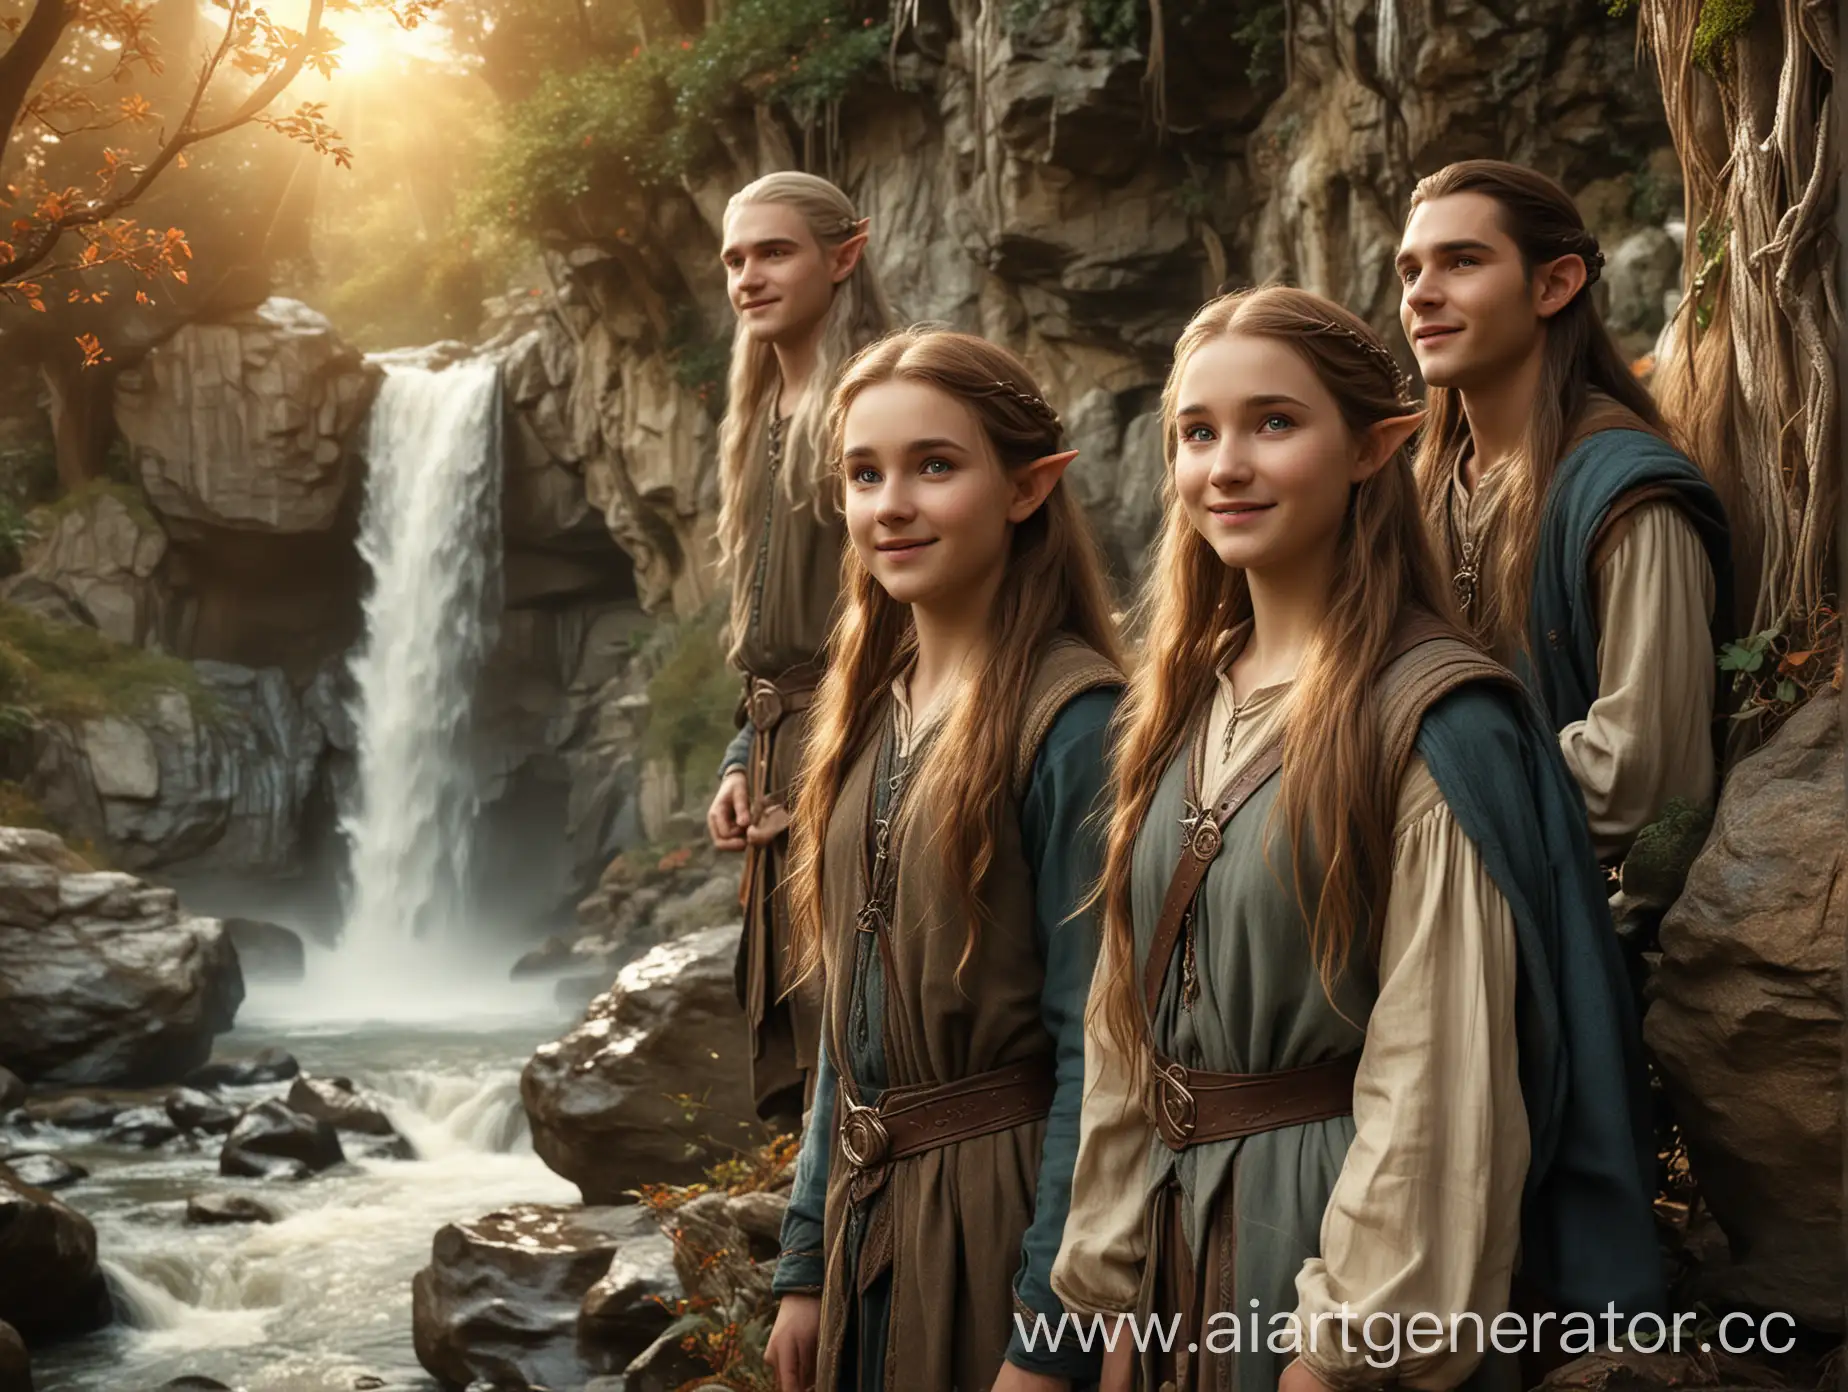 Elven-Gathering-by-Enchanted-Waterfall-in-MiddleEarth